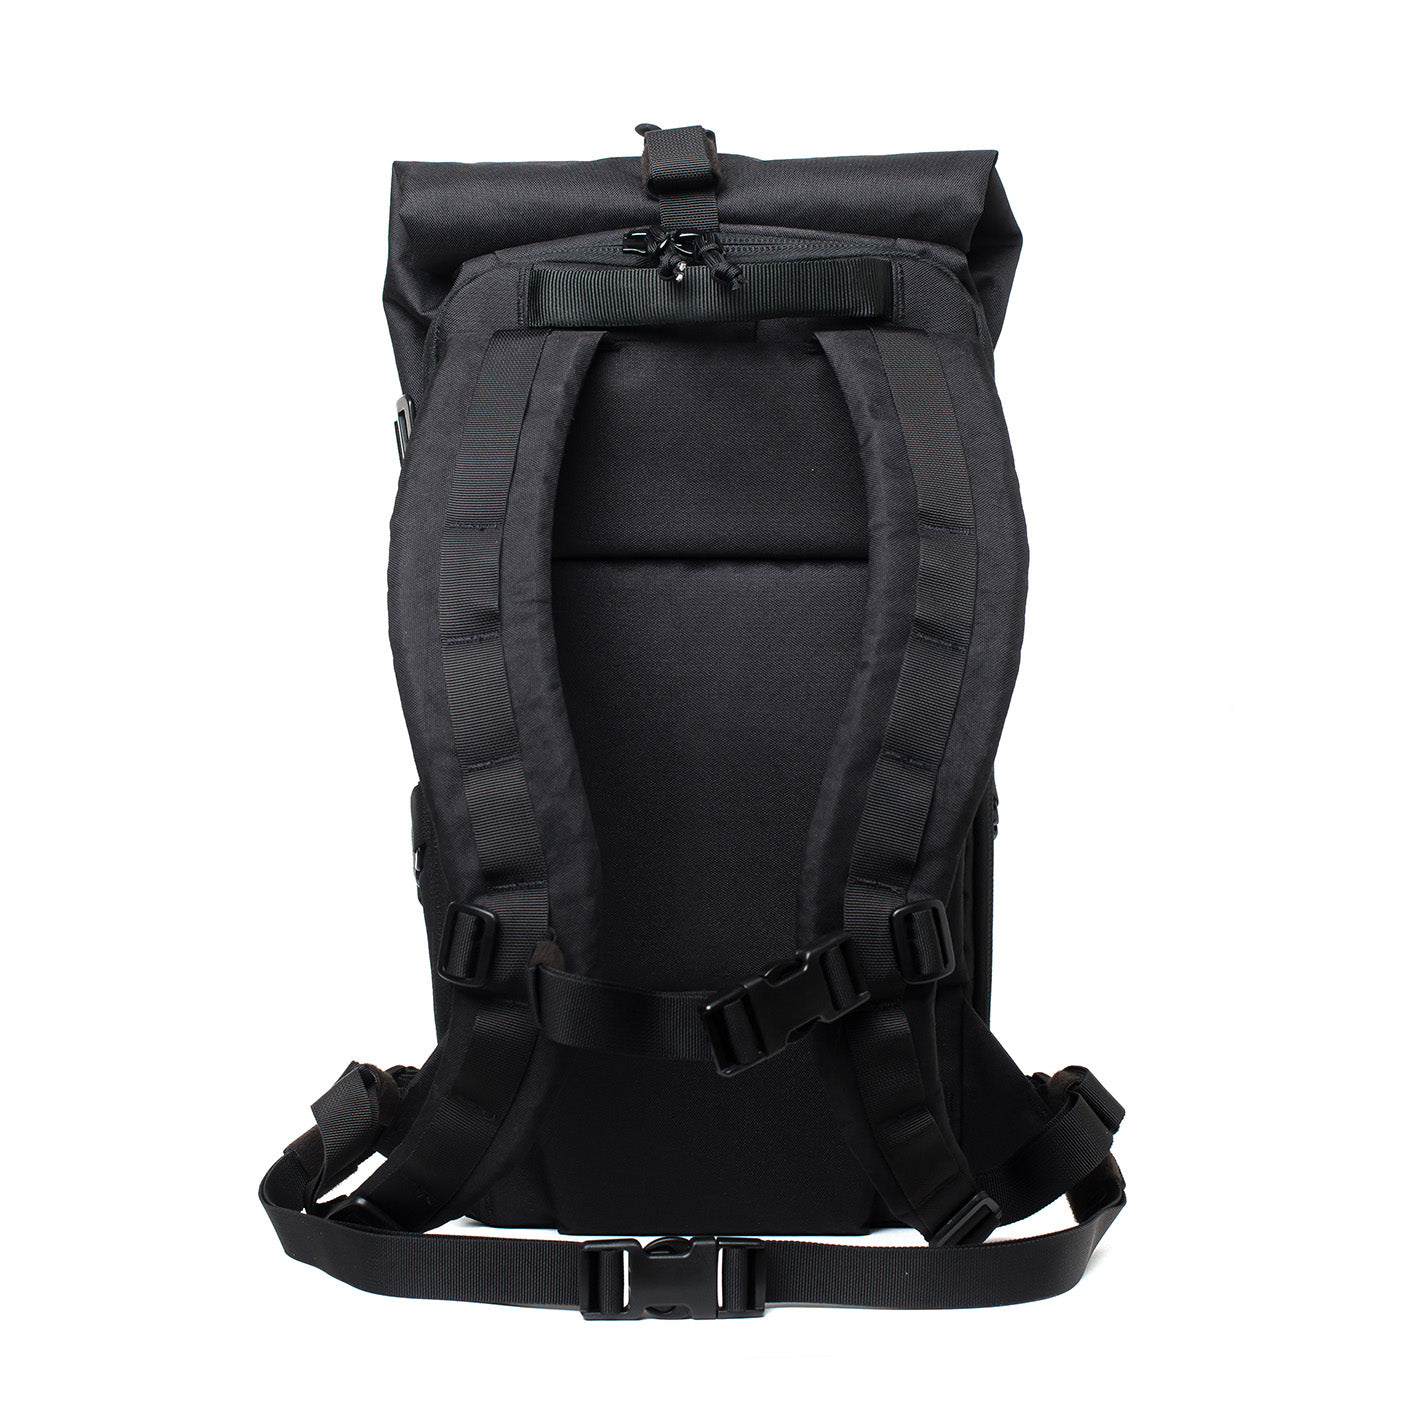 ATD2 Backpack - Black - Storming Gravity